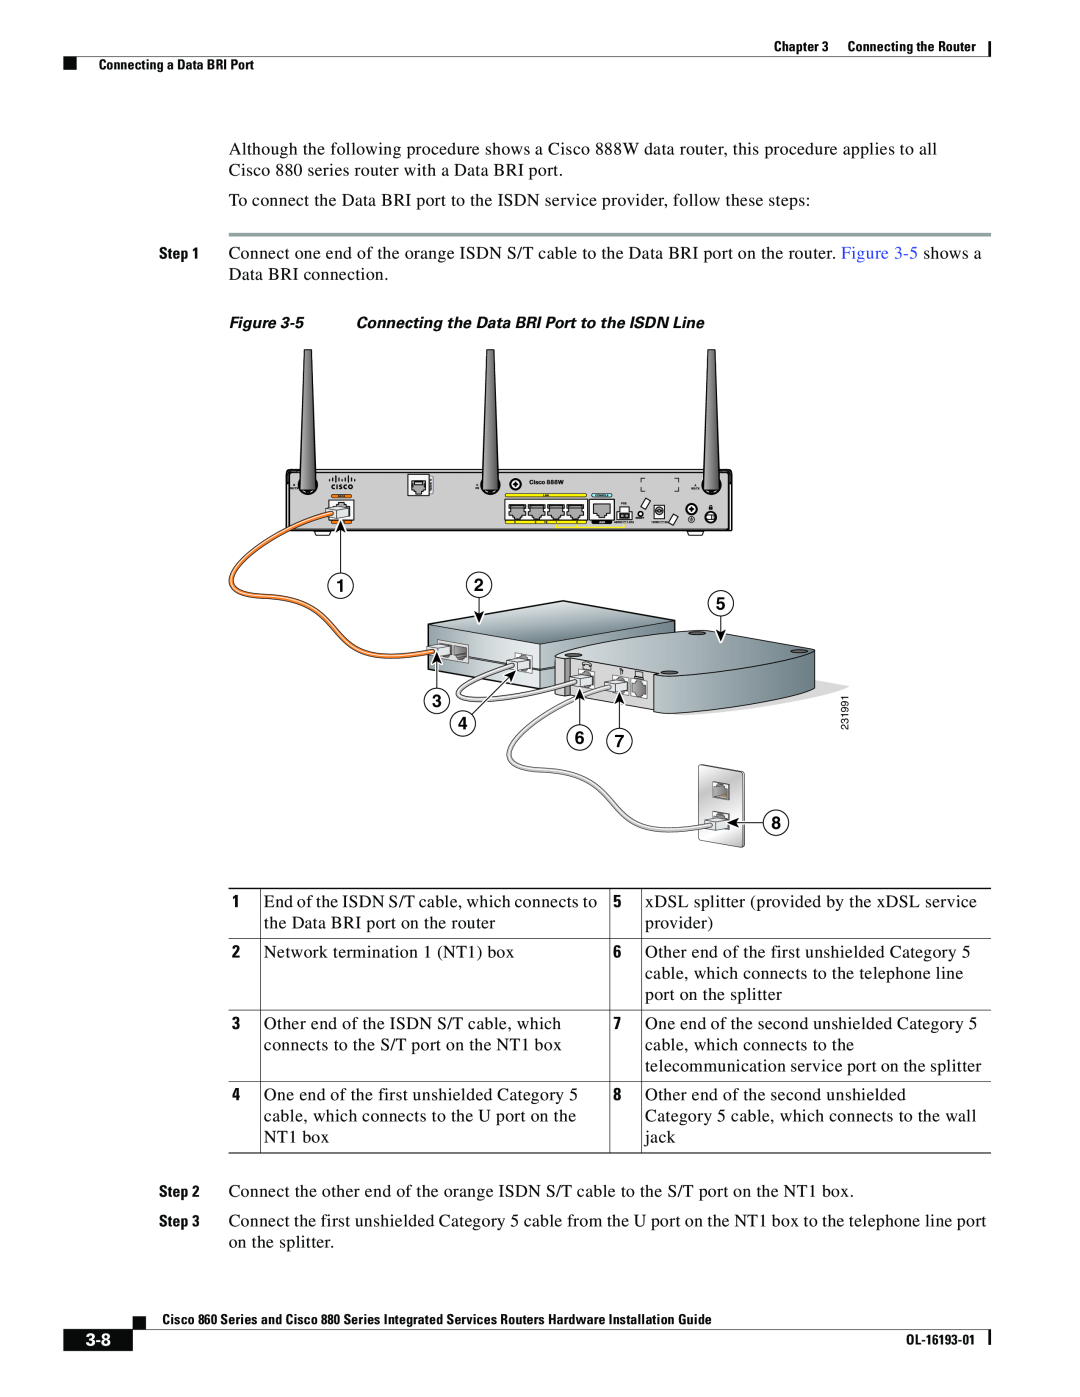 Cisco Systems HIG880, C892FSPK9, 861WGNPK9RF, 860 manual End of the ISDN S/T cable, which connects to 